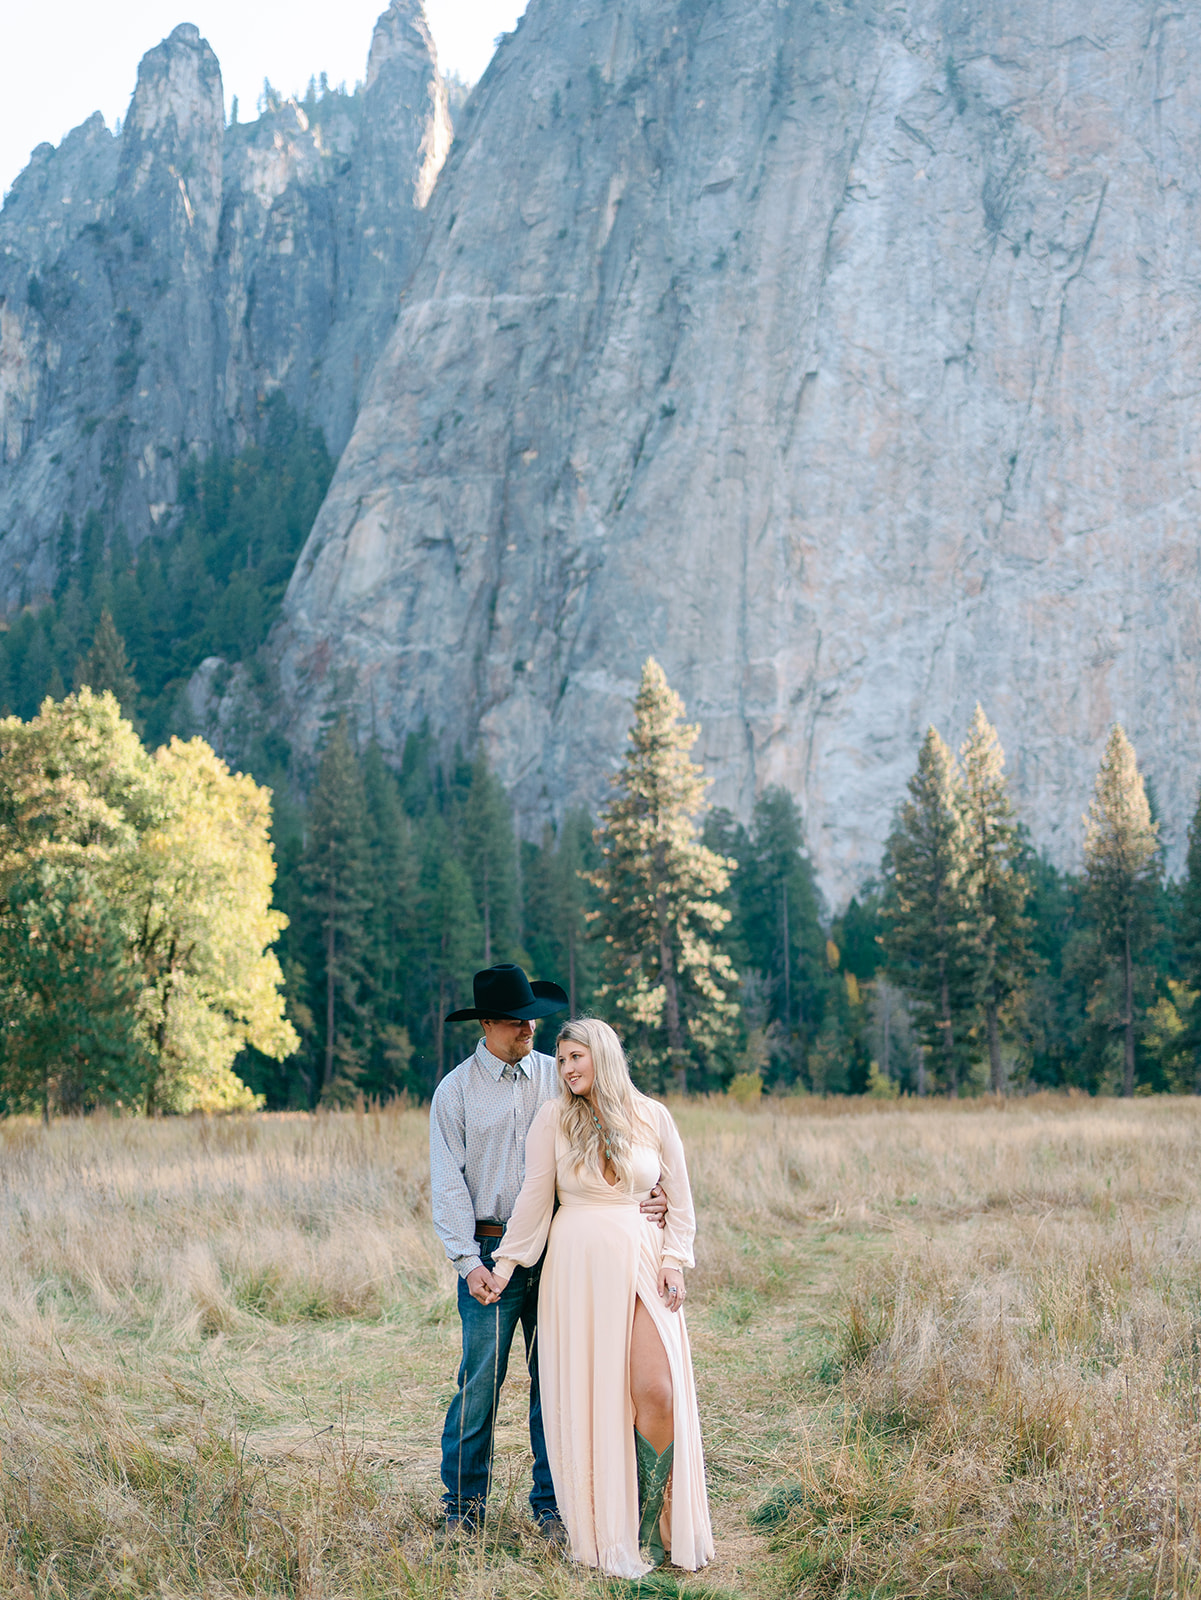 Newlyweds in a pink dress and a a cowboy hat stand holding hands in a field of tall golden grass in a mountain valley